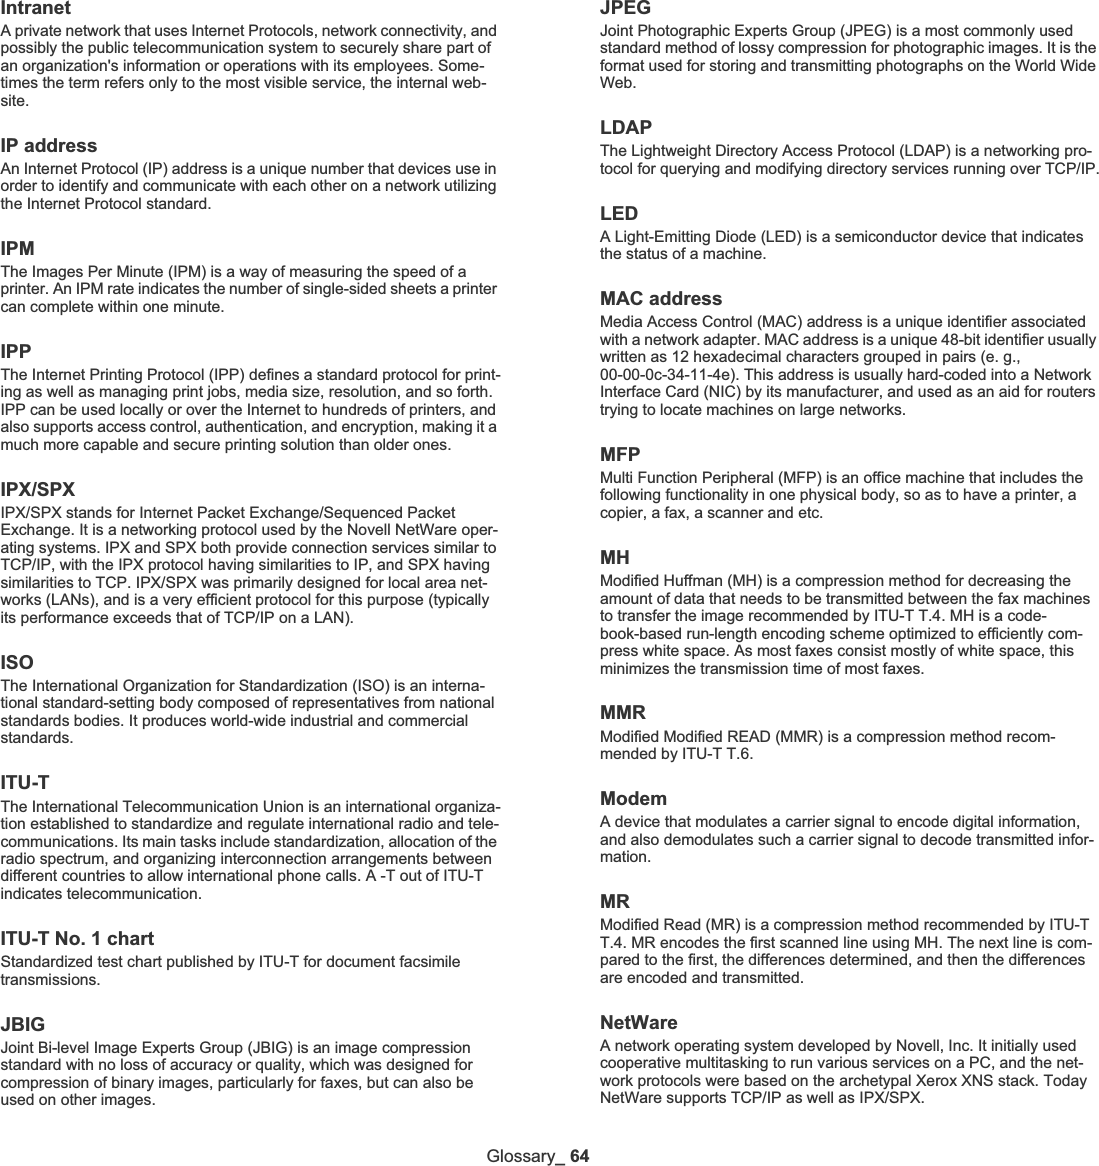 Glossary_ 64IntranetA private network that uses Internet Protocols, network connectivity, and possibly the public telecommunication system to securely share part of an organization&apos;s information or operations with its employees. Some-times the term refers only to the most visible service, the internal web-site.IP addressAn Internet Protocol (IP) address is a unique number that devices use in order to identify and communicate with each other on a network utilizing the Internet Protocol standard.IPMThe Images Per Minute (IPM) is a way of measuring the speed of a printer. An IPM rate indicates the number of single-sided sheets a printer can complete within one minute.IPPThe Internet Printing Protocol (IPP) defines a standard protocol for print-ing as well as managing print jobs, media size, resolution, and so forth. IPP can be used locally or over the Internet to hundreds of printers, and also supports access control, authentication, and encryption, making it a much more capable and secure printing solution than older ones.IPX/SPXIPX/SPX stands for Internet Packet Exchange/Sequenced Packet Exchange. It is a networking protocol used by the Novell NetWare oper-ating systems. IPX and SPX both provide connection services similar to TCP/IP, with the IPX protocol having similarities to IP, and SPX having similarities to TCP. IPX/SPX was primarily designed for local area net-works (LANs), and is a very efficient protocol for this purpose (typically its performance exceeds that of TCP/IP on a LAN).ISOThe International Organization for Standardization (ISO) is an interna-tional standard-setting body composed of representatives from national standards bodies. It produces world-wide industrial and commercial standards.ITU-TThe International Telecommunication Union is an international organiza-tion established to standardize and regulate international radio and tele-communications. Its main tasks include standardization, allocation of the radio spectrum, and organizing interconnection arrangements between different countries to allow international phone calls. A -T out of ITU-T indicates telecommunication.ITU-T No. 1 chartStandardized test chart published by ITU-T for document facsimile transmissions.JBIGJoint Bi-level Image Experts Group (JBIG) is an image compression standard with no loss of accuracy or quality, which was designed for compression of binary images, particularly for faxes, but can also be used on other images.JPEGJoint Photographic Experts Group (JPEG) is a most commonly used standard method of lossy compression for photographic images. It is the format used for storing and transmitting photographs on the World Wide Web.LDAPThe Lightweight Directory Access Protocol (LDAP) is a networking pro-tocol for querying and modifying directory services running over TCP/IP.LEDA Light-Emitting Diode (LED) is a semiconductor device that indicates the status of a machine.MAC addressMedia Access Control (MAC) address is a unique identifier associated with a network adapter. MAC address is a unique 48-bit identifier usually written as 12 hexadecimal characters grouped in pairs (e. g., 00-00-0c-34-11-4e). This address is usually hard-coded into a Network Interface Card (NIC) by its manufacturer, and used as an aid for routers trying to locate machines on large networks.MFPMulti Function Peripheral (MFP) is an office machine that includes the following functionality in one physical body, so as to have a printer, a copier, a fax, a scanner and etc.MHModified Huffman (MH) is a compression method for decreasing the amount of data that needs to be transmitted between the fax machines to transfer the image recommended by ITU-T T.4. MH is a code-book-based run-length encoding scheme optimized to efficiently com-press white space. As most faxes consist mostly of white space, this minimizes the transmission time of most faxes. MMRModified Modified READ (MMR) is a compression method recom-mended by ITU-T T.6.ModemA device that modulates a carrier signal to encode digital information, and also demodulates such a carrier signal to decode transmitted infor-mation.MRModified Read (MR) is a compression method recommended by ITU-T T.4. MR encodes the first scanned line using MH. The next line is com-pared to the first, the differences determined, and then the differences are encoded and transmitted.NetWareA network operating system developed by Novell, Inc. It initially used cooperative multitasking to run various services on a PC, and the net-work protocols were based on the archetypal Xerox XNS stack. Today NetWare supports TCP/IP as well as IPX/SPX.